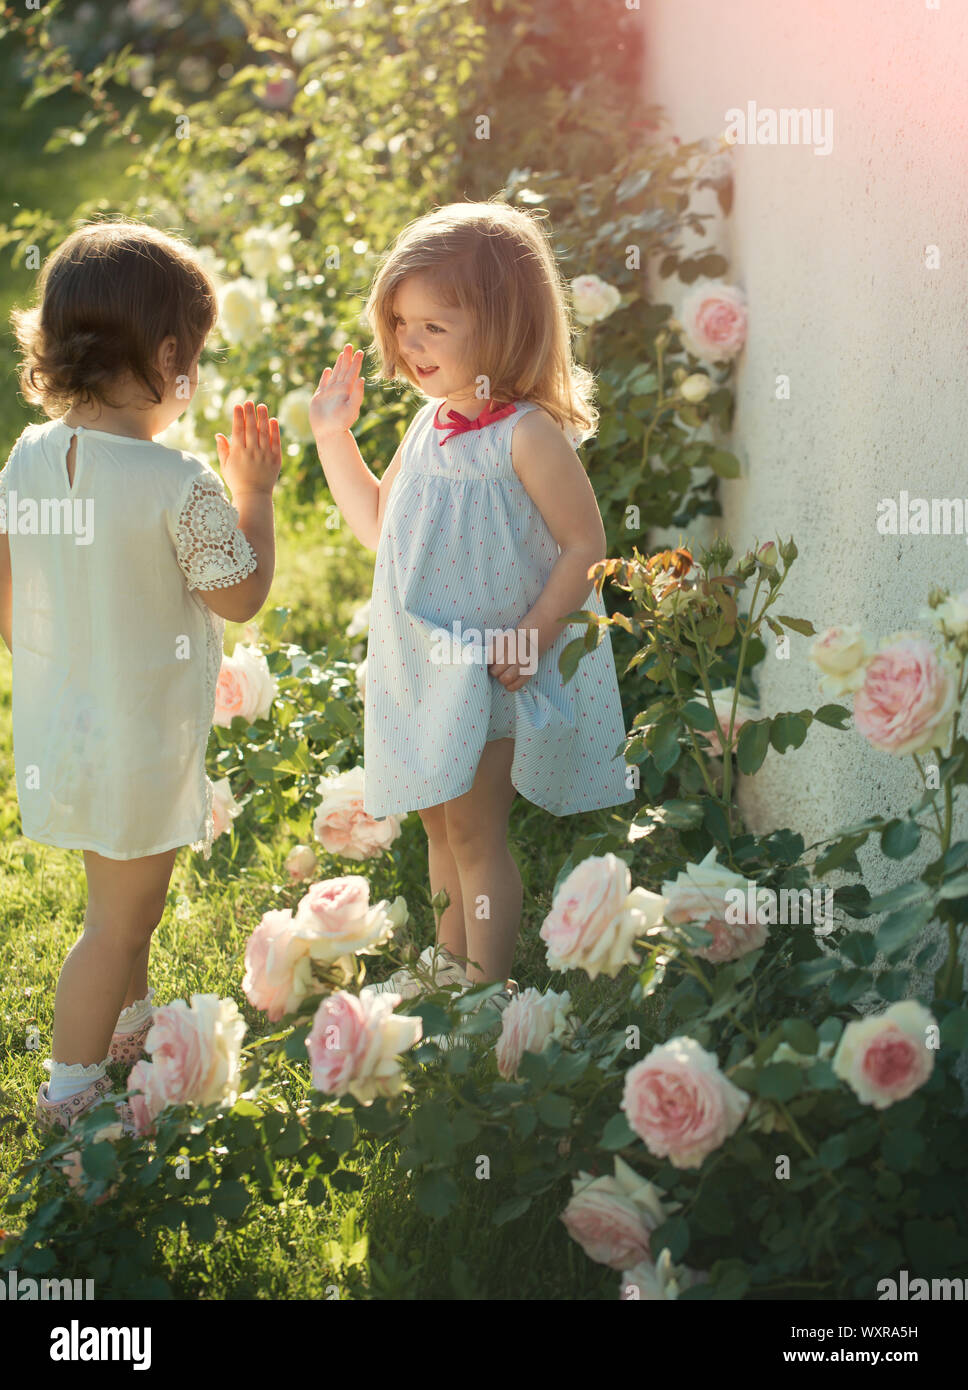 Two girls smiling at blossoming rose flowers. Children playing ...